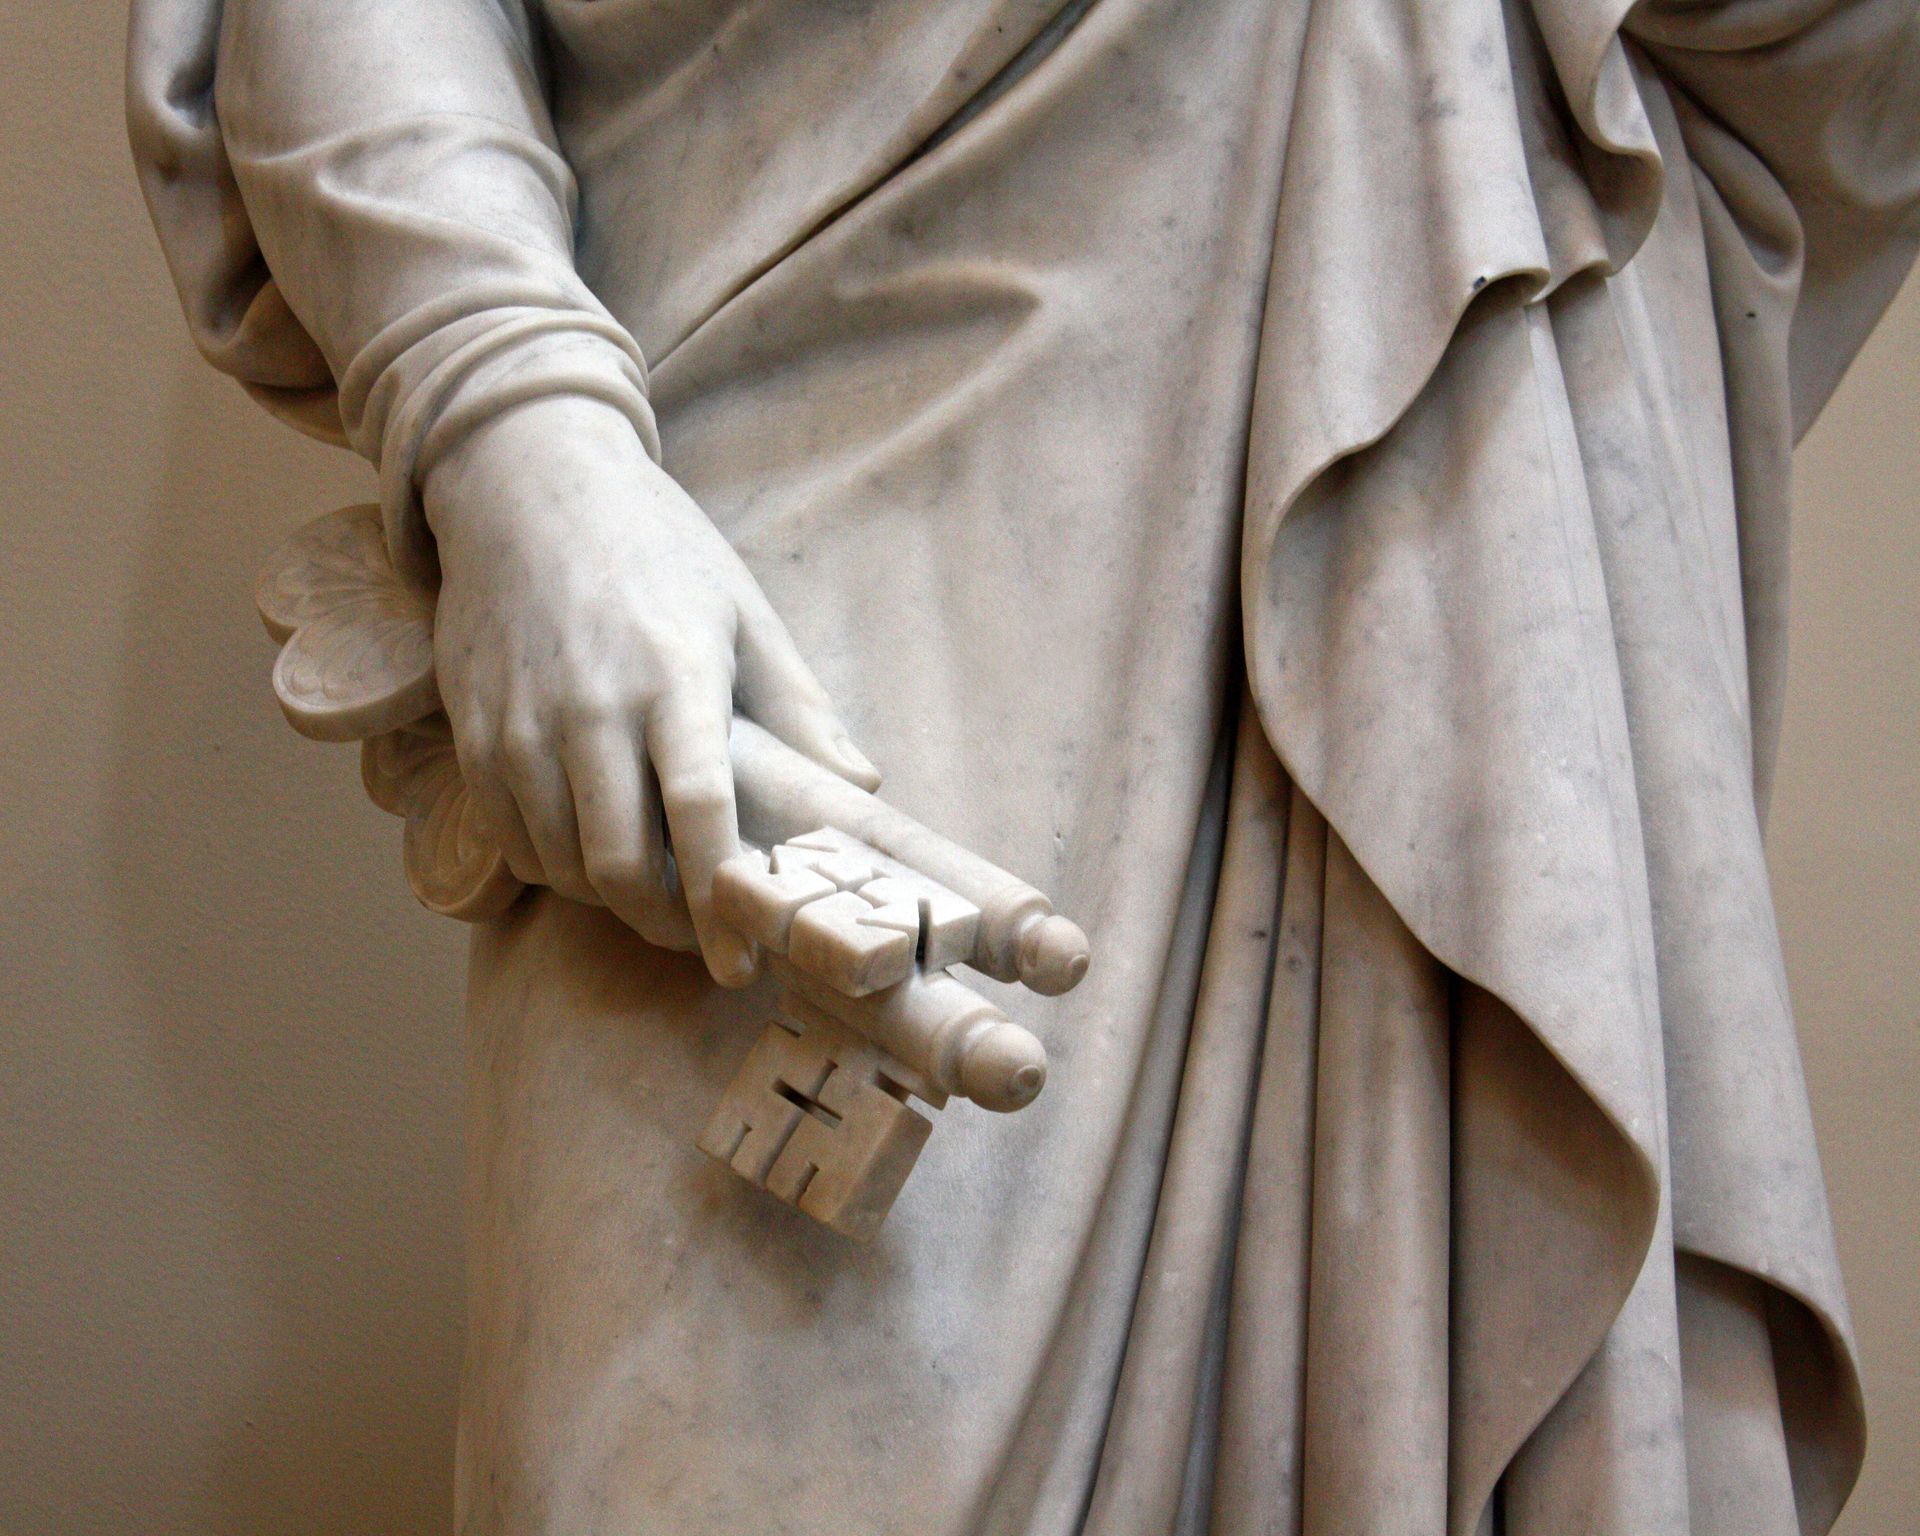 A photo of a statue of the Apostle Peter holding the keys of the gospel.